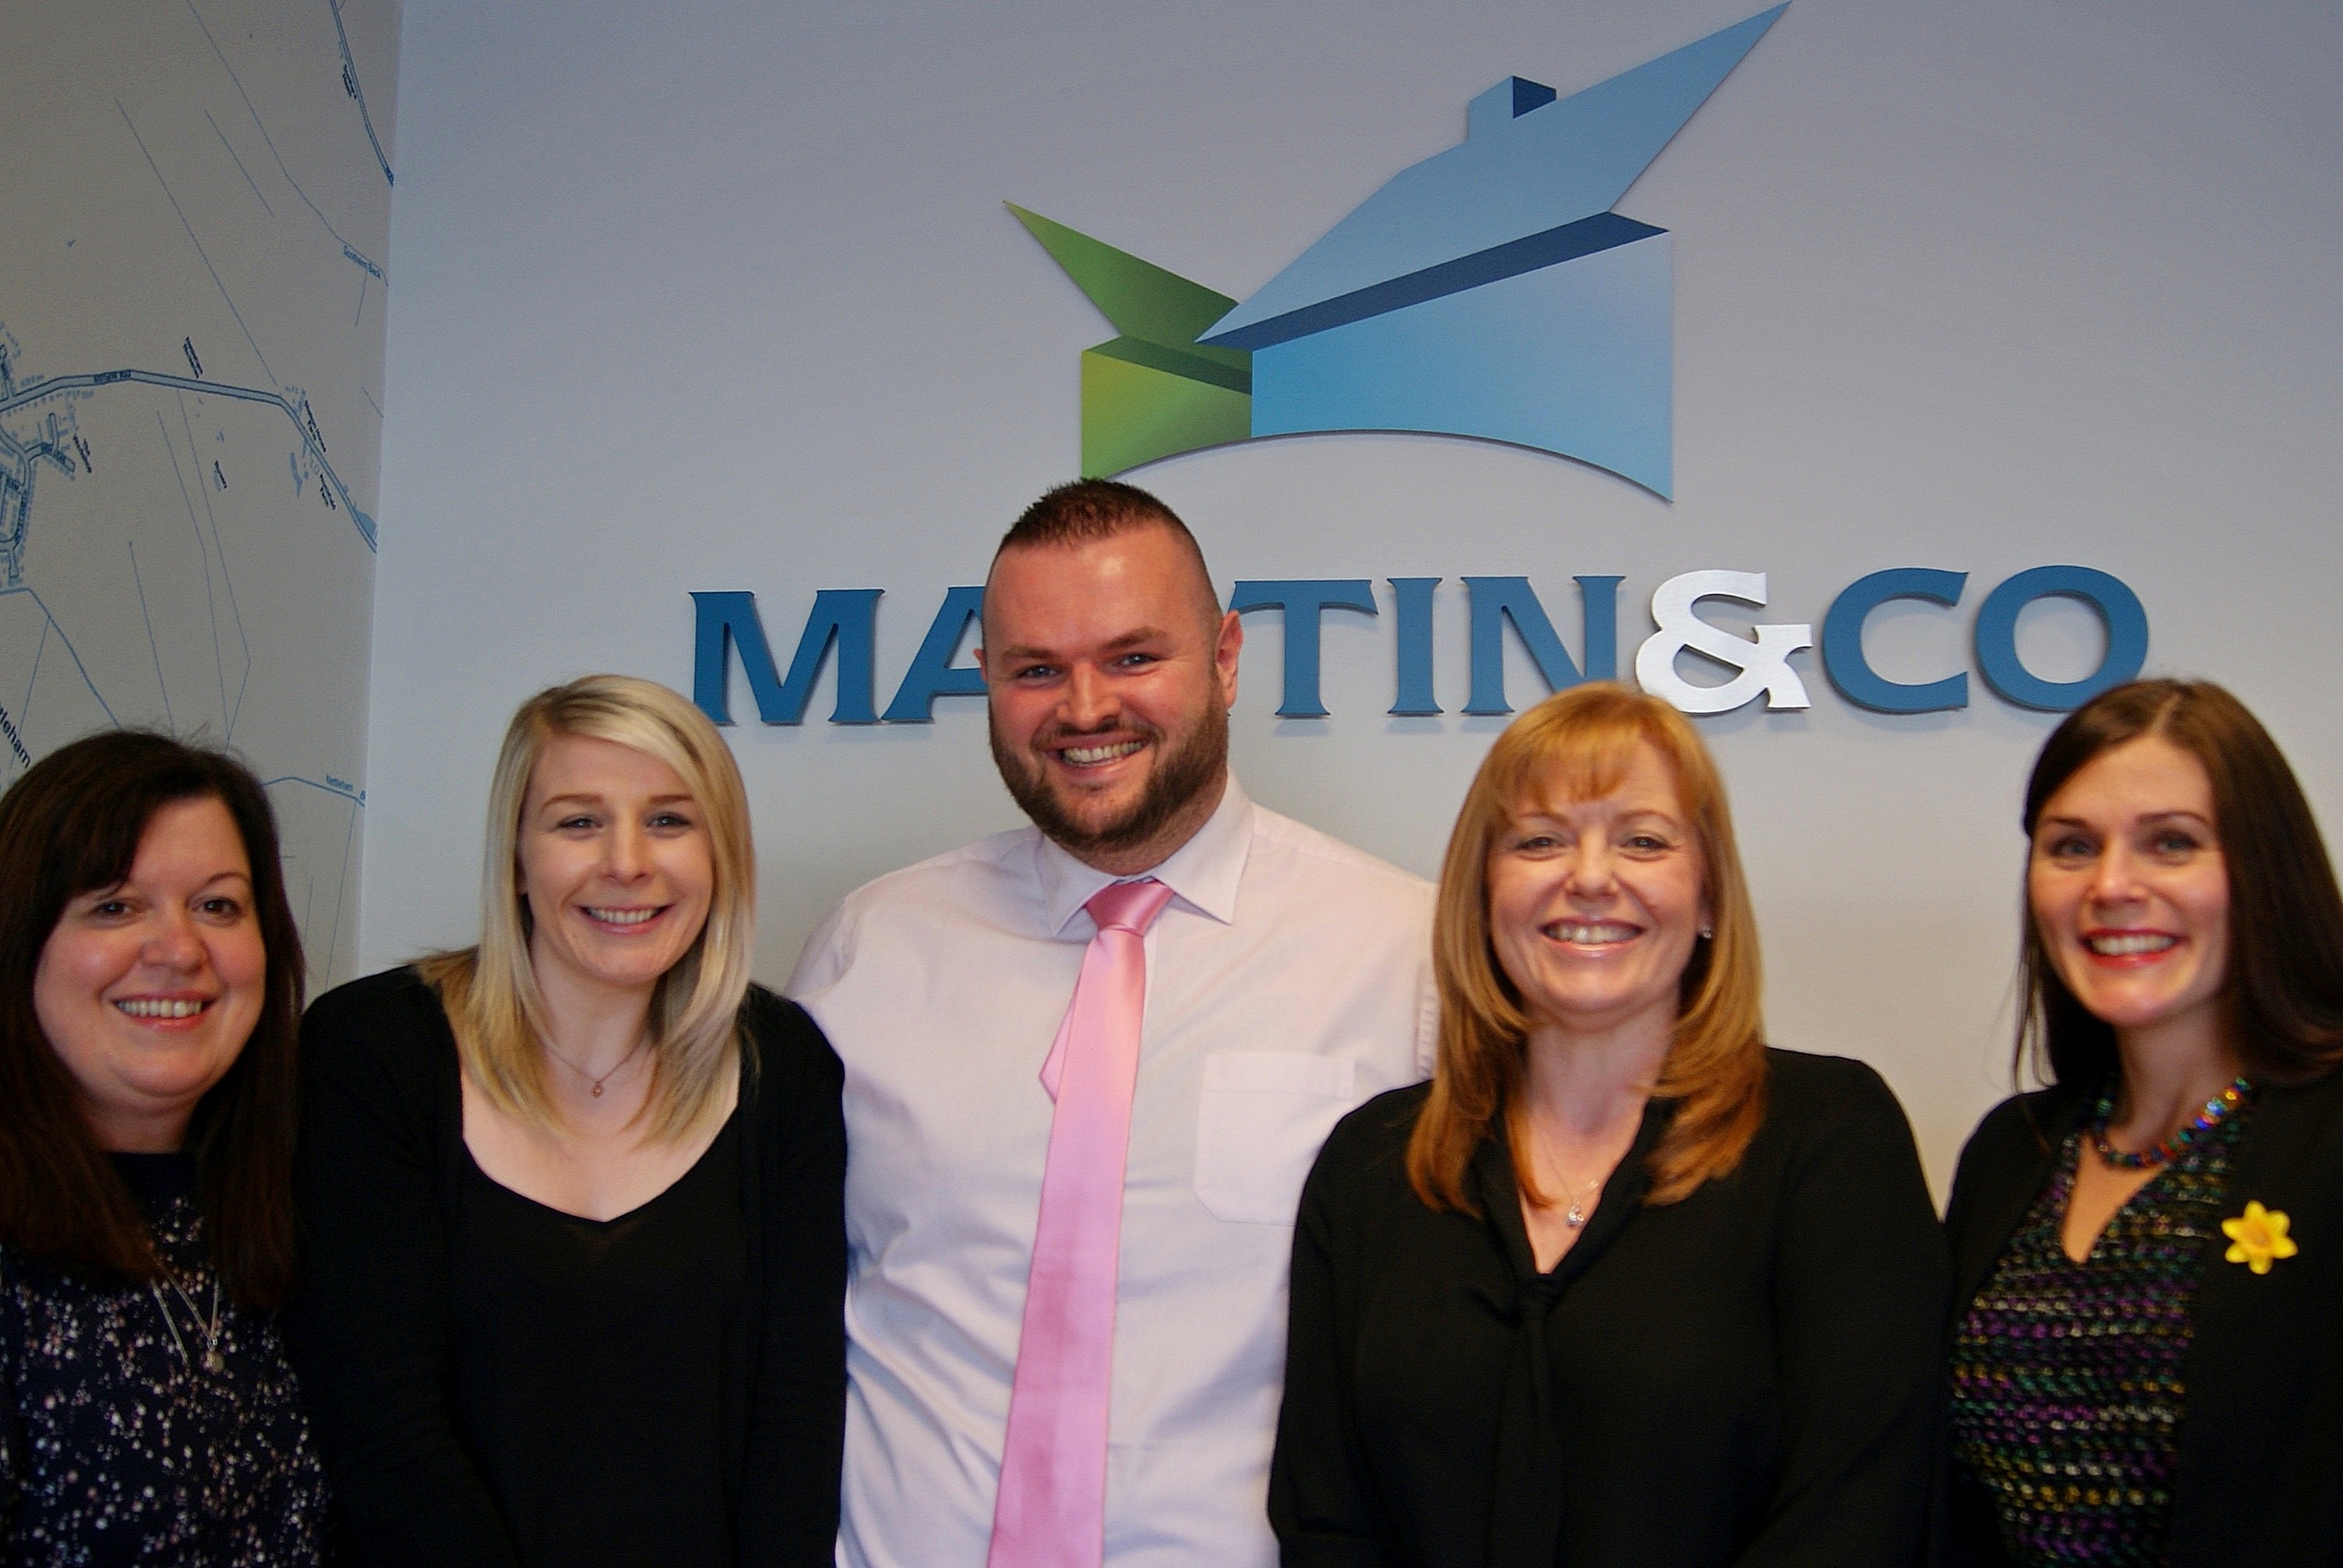 Images Martin & Co Lincoln Lettings & Estate Agents